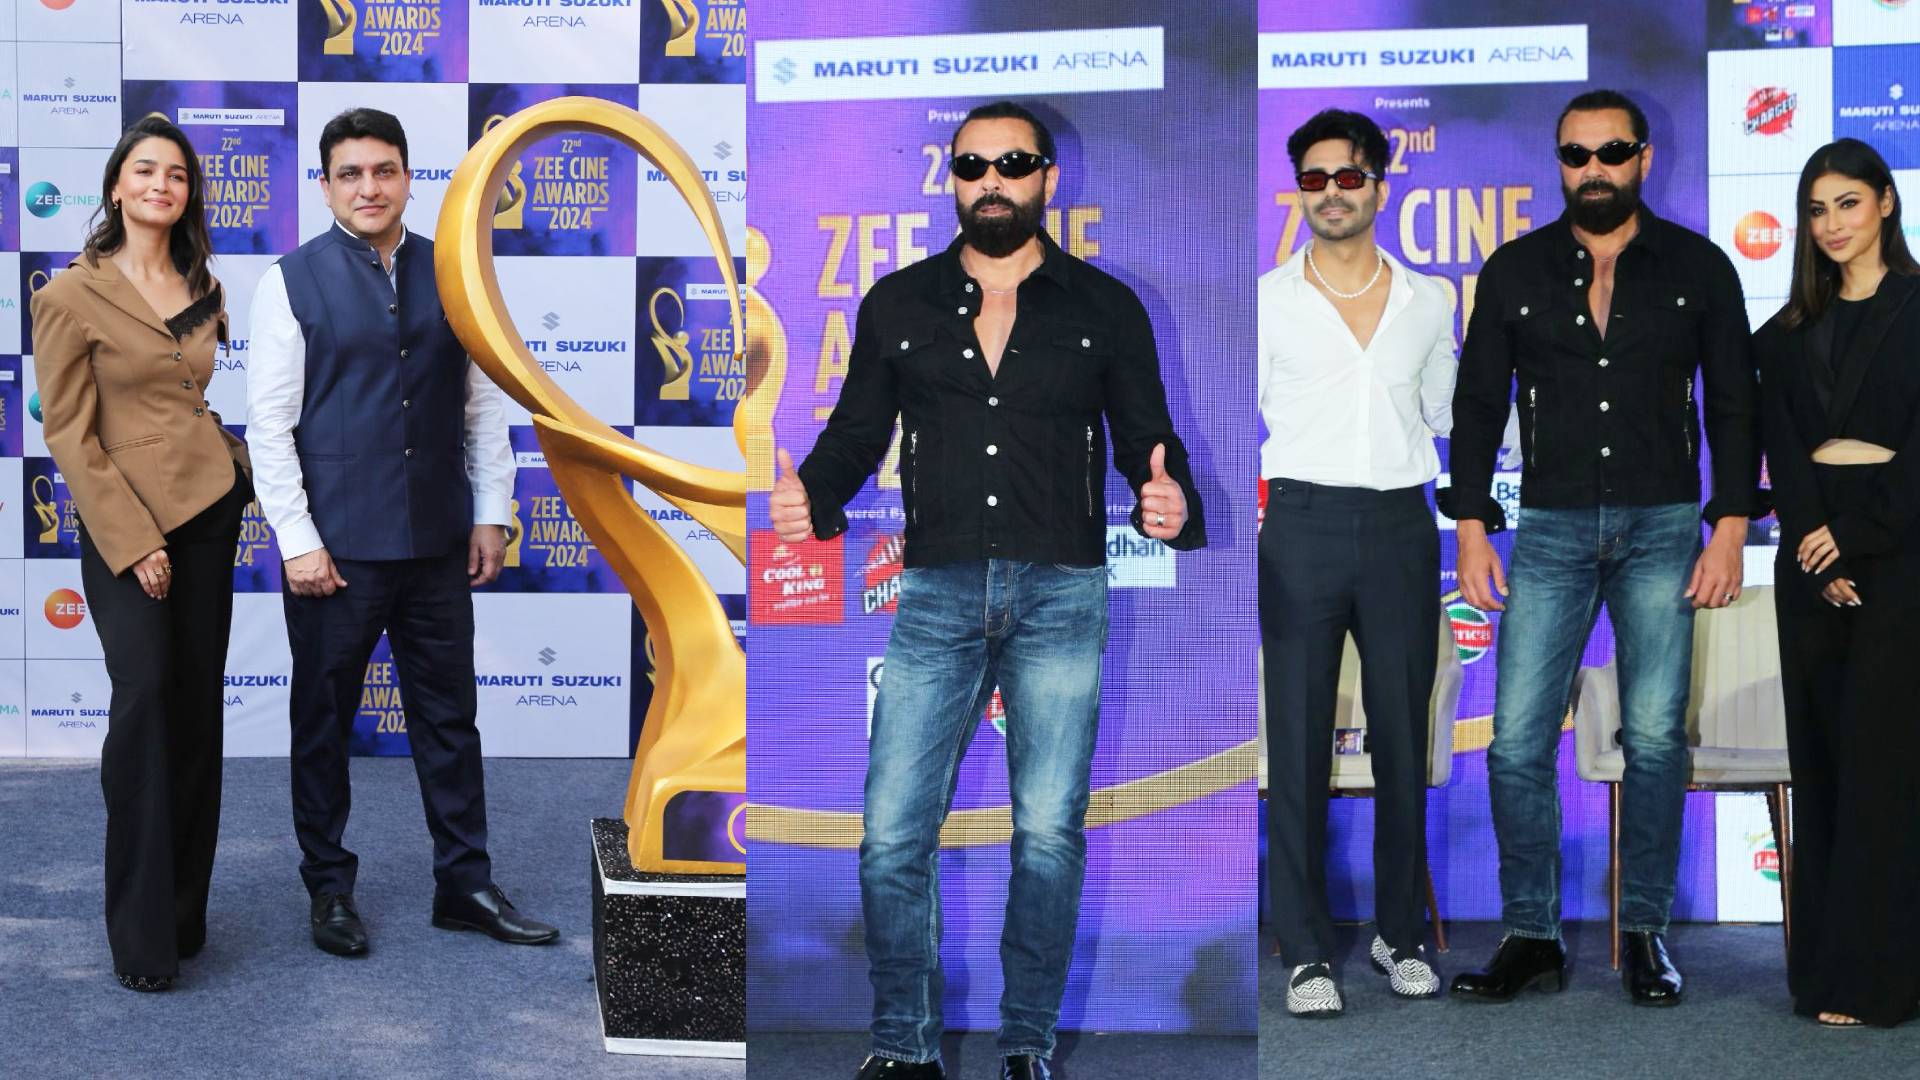 Zee Cine Awards continues its association with Maruti Suzuki Arena for its 22nd Edition